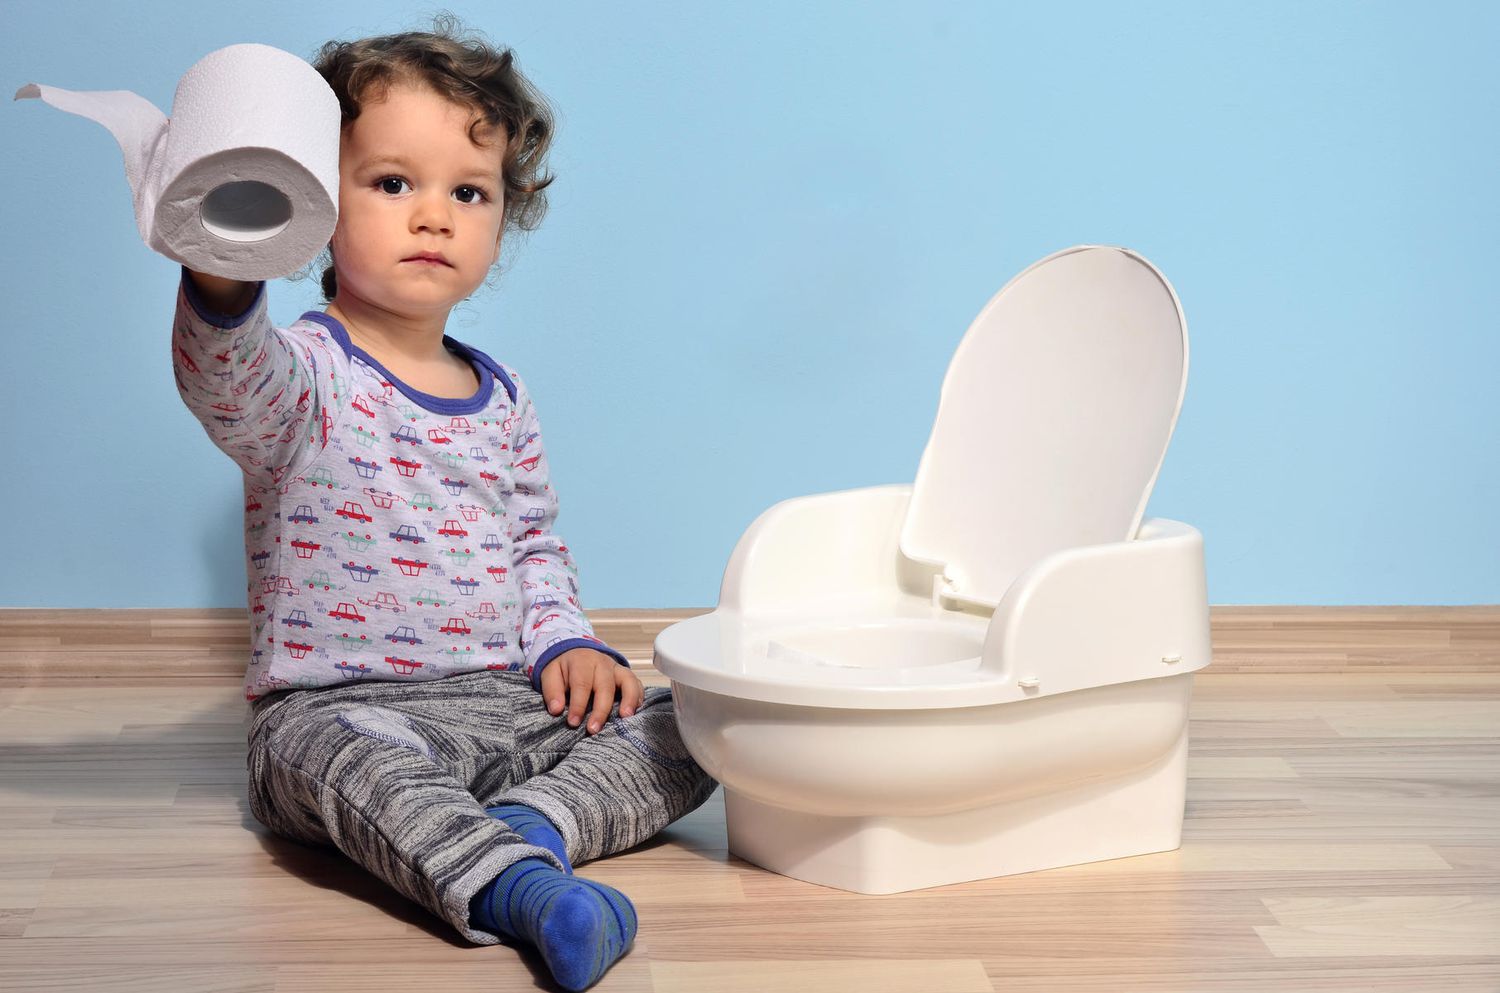 Tips for Parents for Potty Training Setbacks